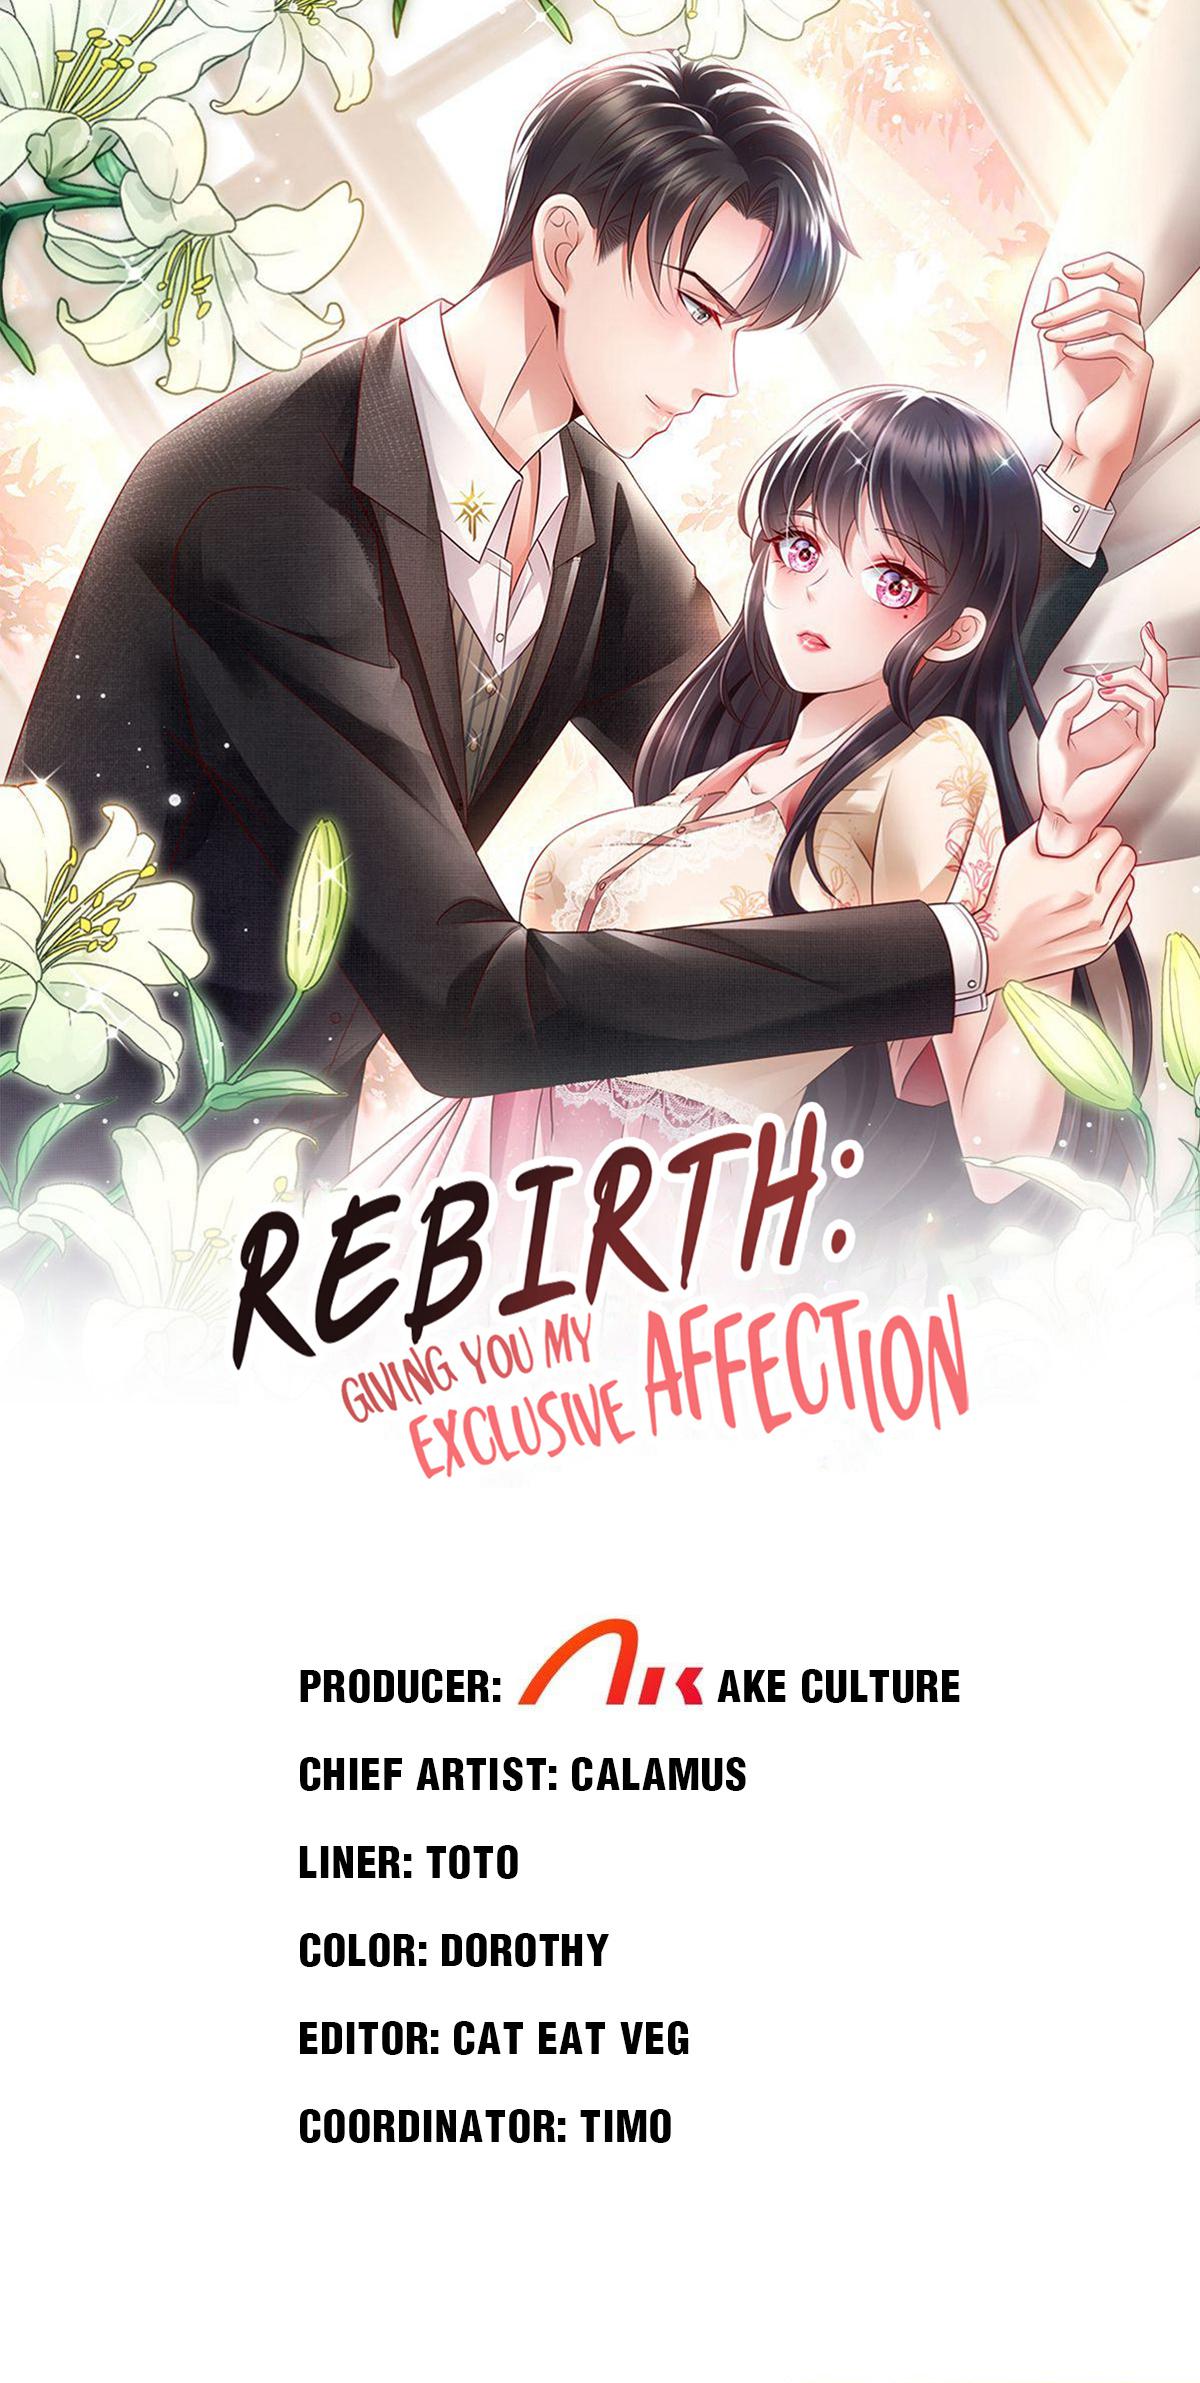 Rebirth: Giving You My Exclusive Affection 120